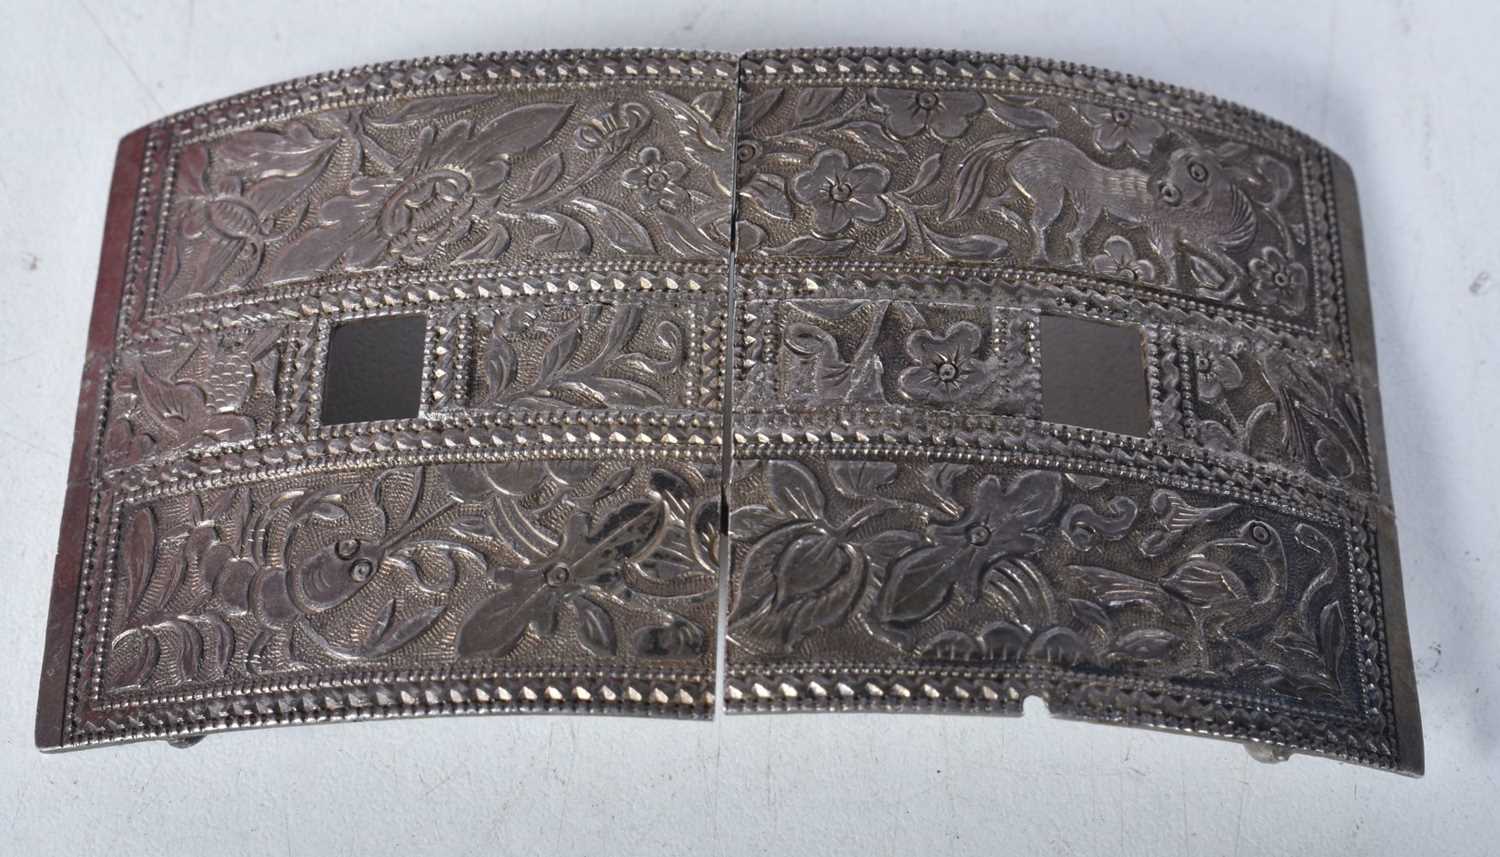 A Middle Eastern Belt Buckle decorated with Birds and Animals. 5.1cm x 9.6cm, weight 60g